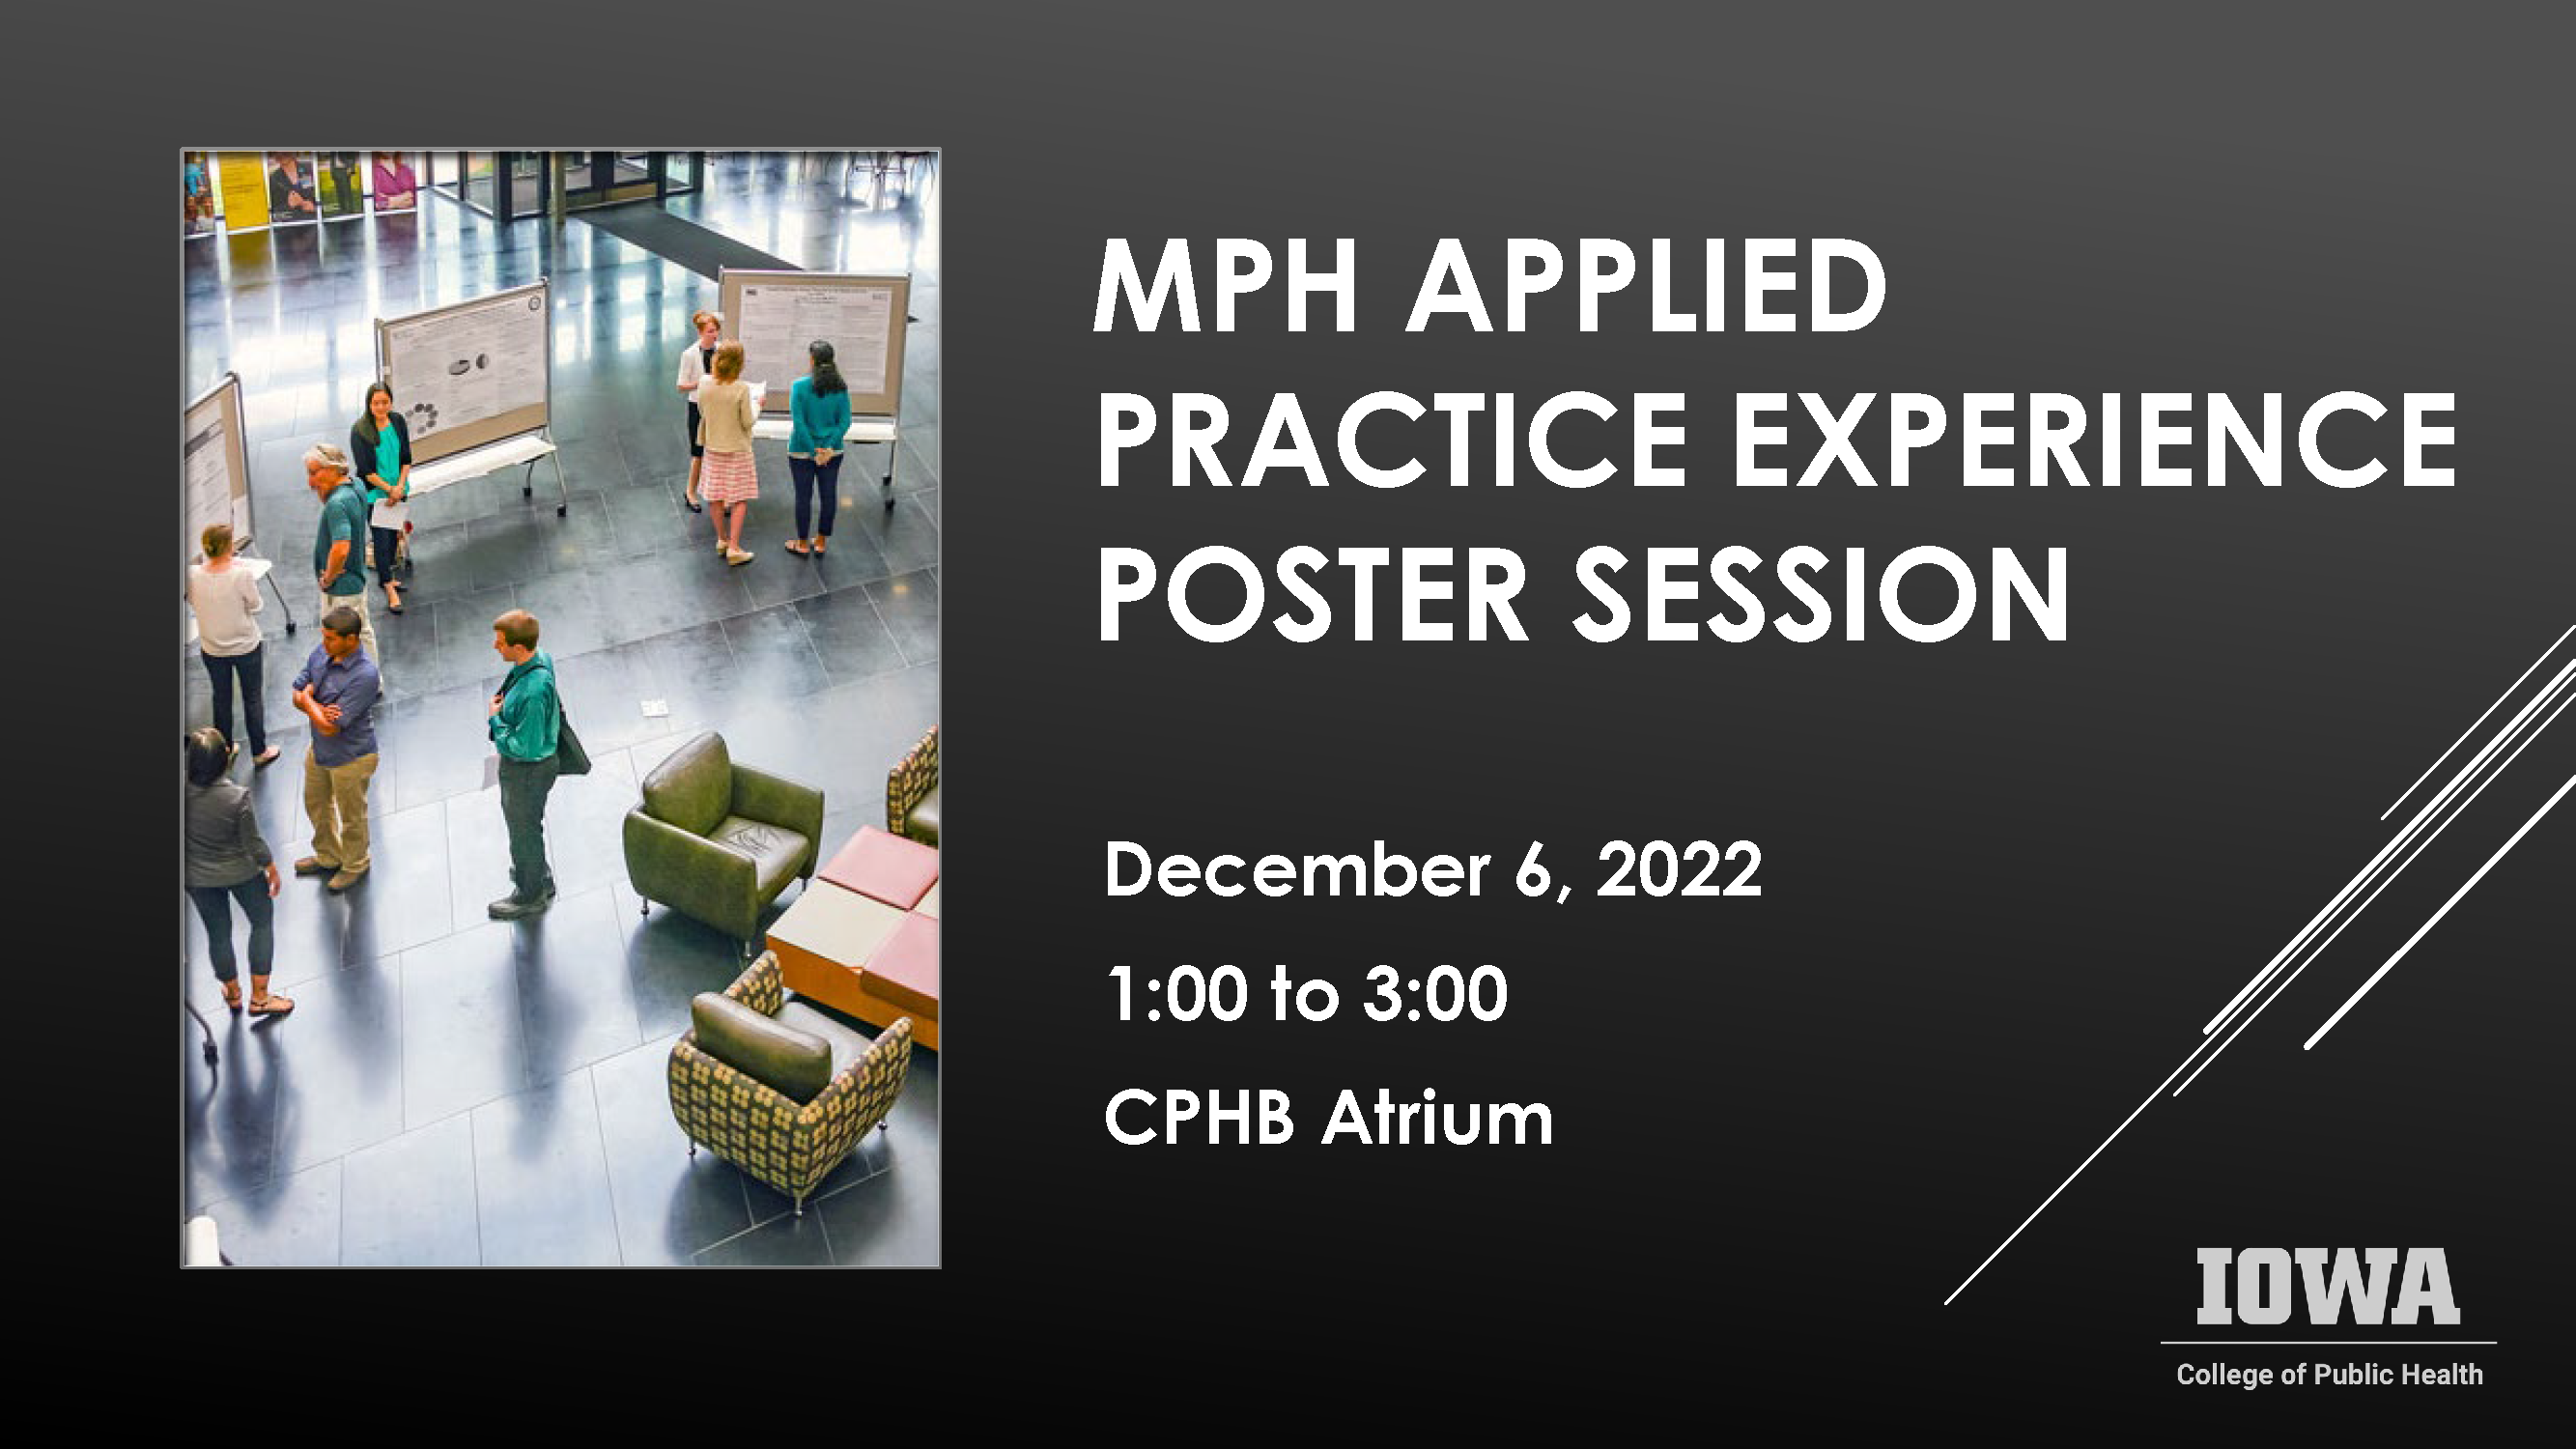 MPH Applied Practice Experience poster session is December 6, 2022 from 1:00 to3:00 in the CPHB atrium.